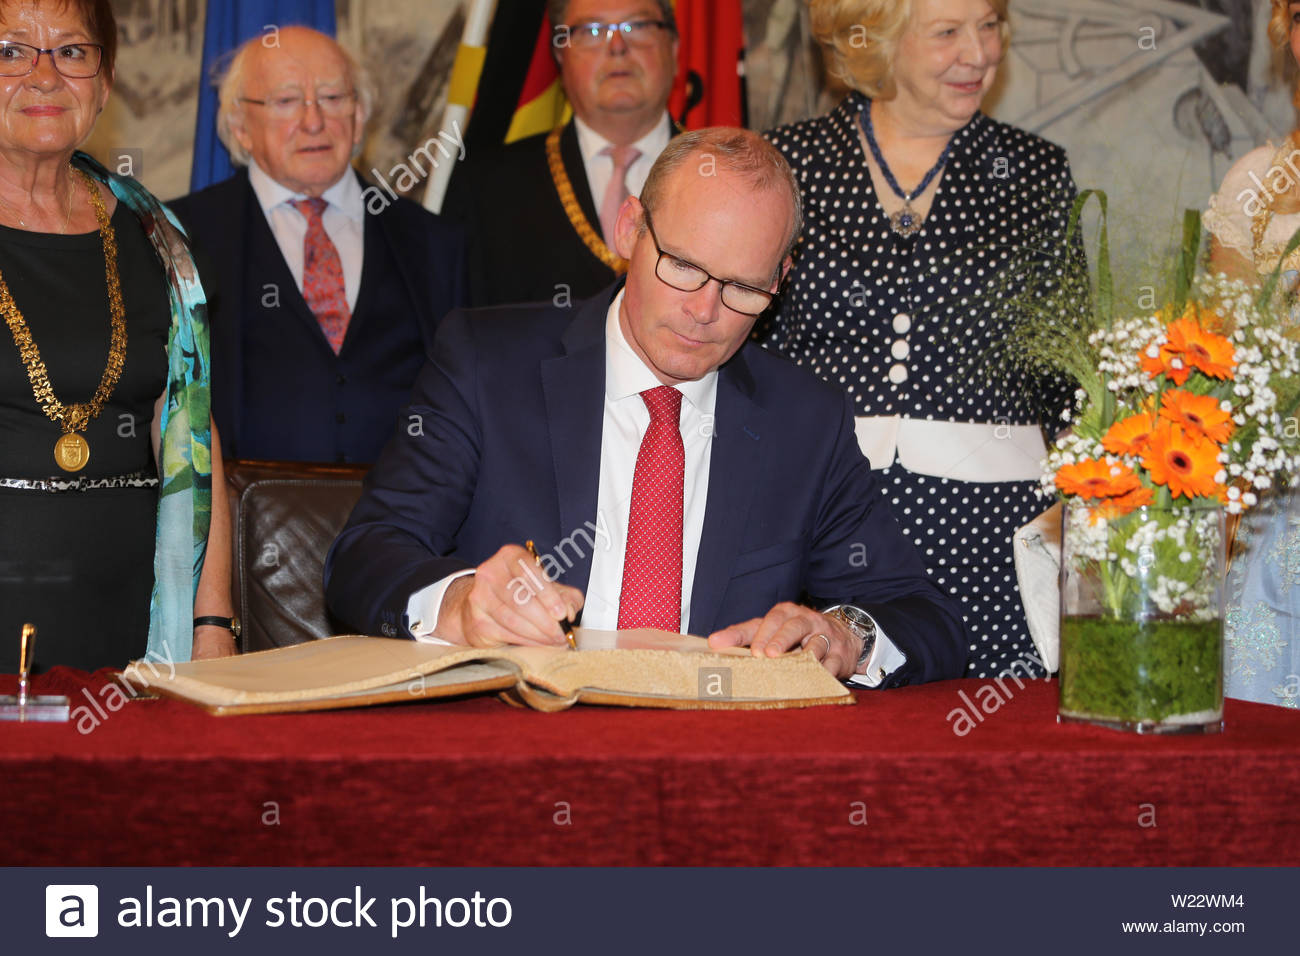 Wurzburg, Germany. 05th July, 2019. Irish Tánaiste Simon Coveney signs the visitors book in Würzburg town hall today. President Michael D Higgins has visited Würzburg with Mr Coveney in Bavaria today on the last leg of their diplomatic trip to Germany. Earlier in the week he met Angela Merkel and German President Frank Steinmeier. President Higgins stopped at the university library this afternoon to view treasures of Irish literature and art, in particular the work of the famous German philospher, linguist and Latin scholar Casper Zeuss whose book Grammatica Celtica first documented the gramma Stock Photo